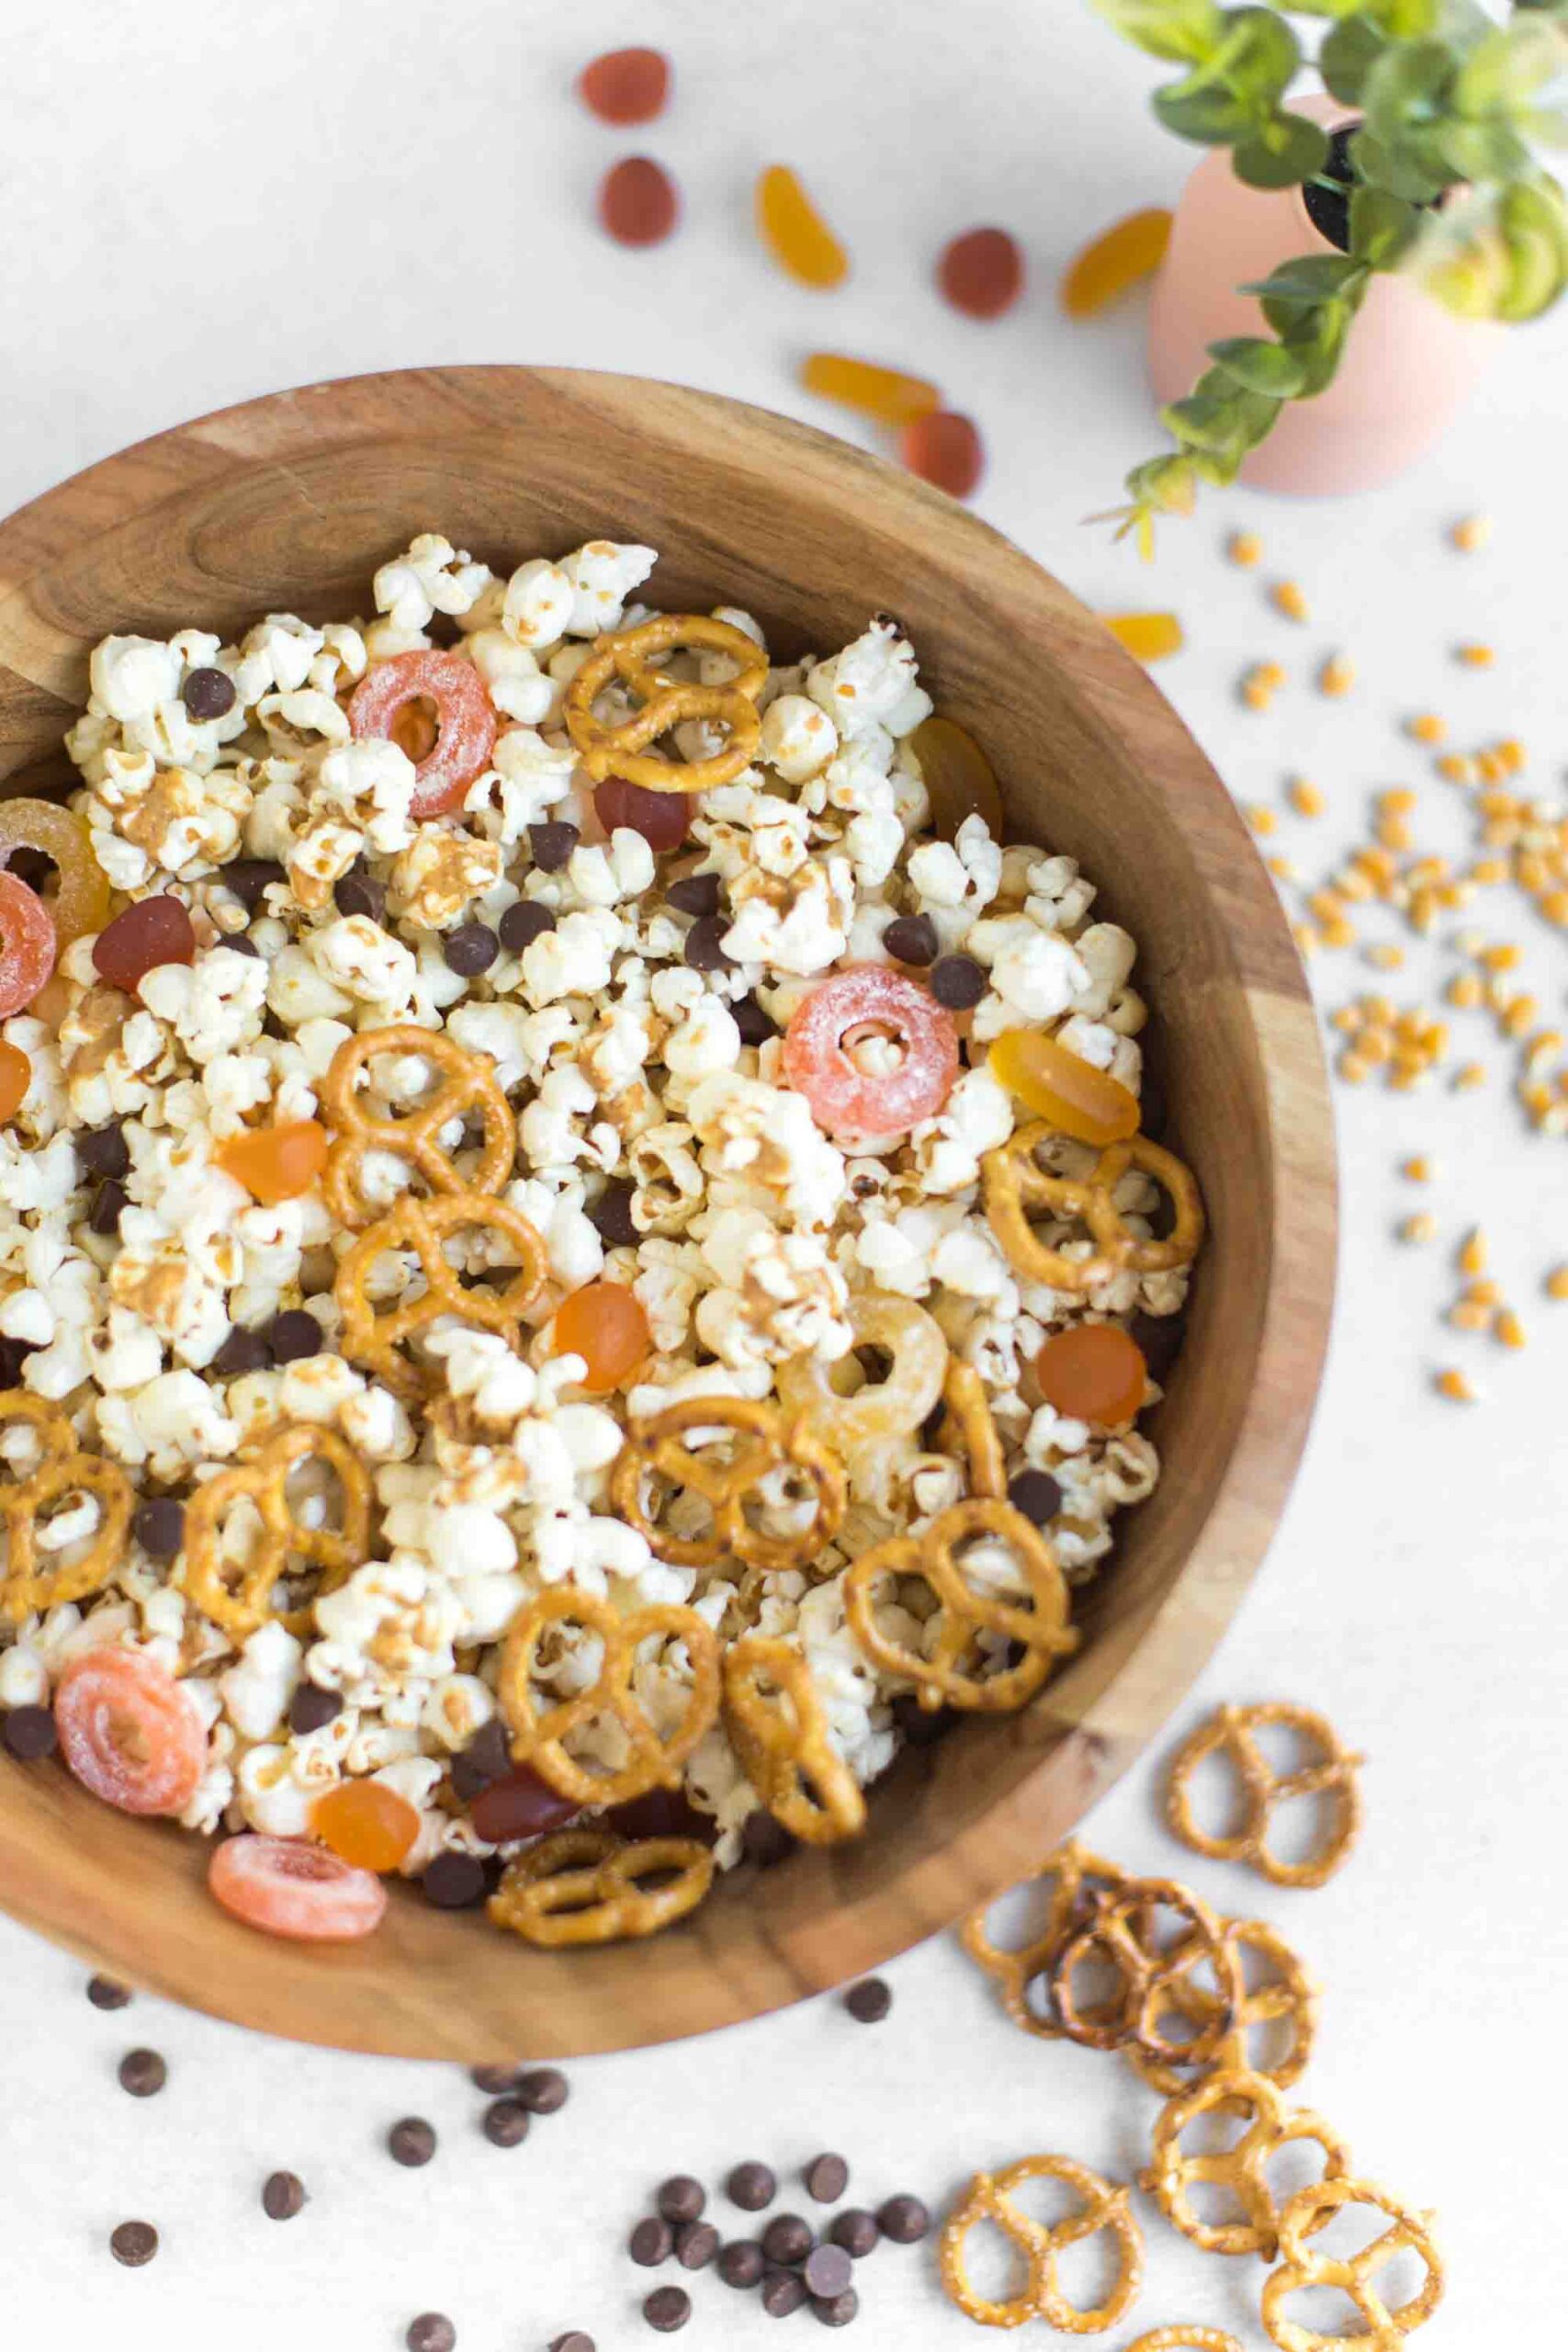 Vegan Halloween Recipe Peanut Butter Popcorn With Chocolate Chips and Candy